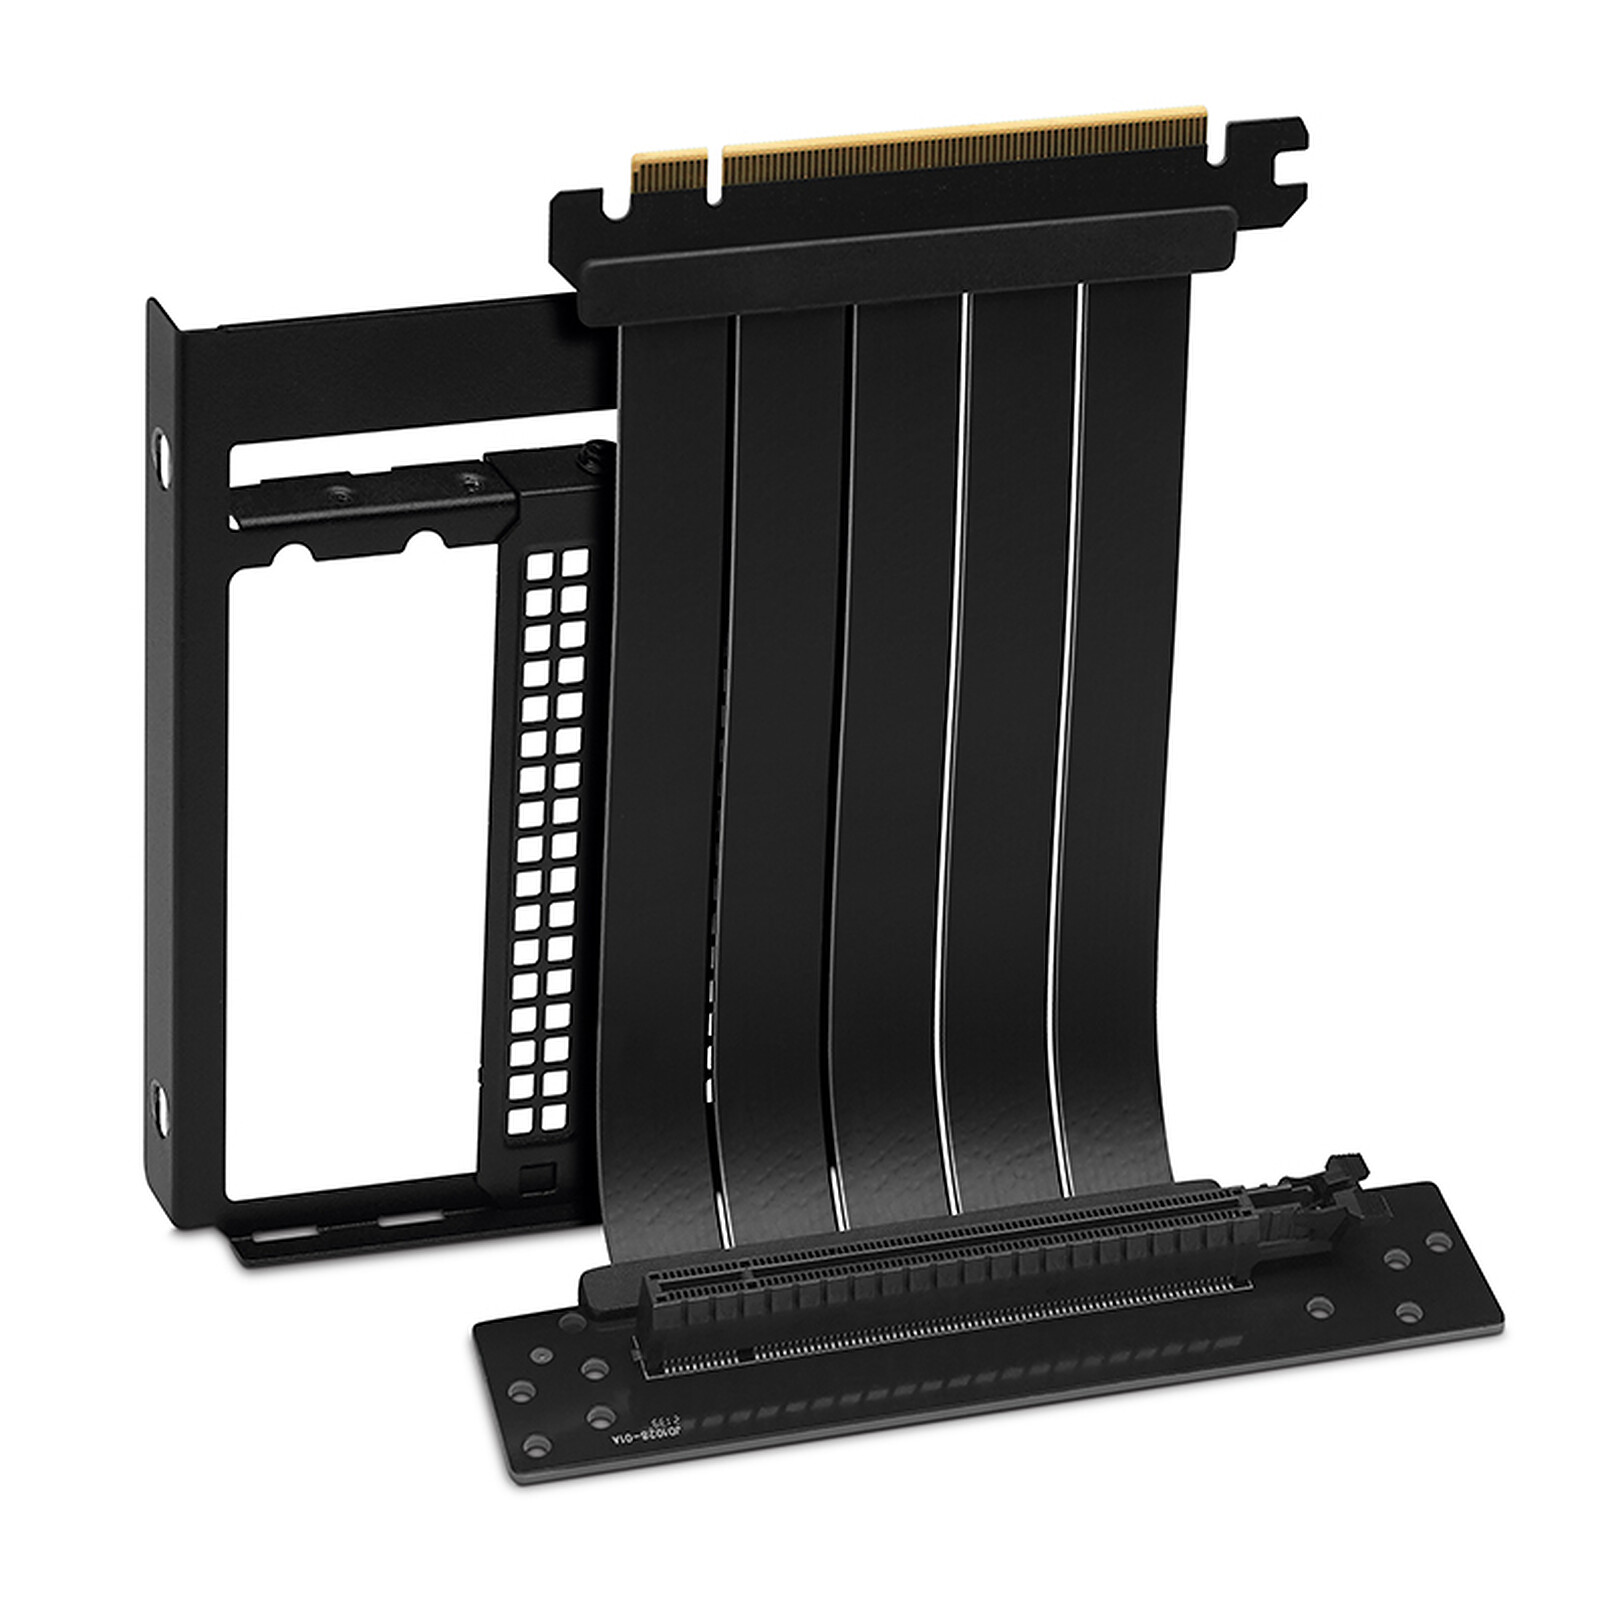 Is it necessary to install a gpu support bracket? : r/lianli